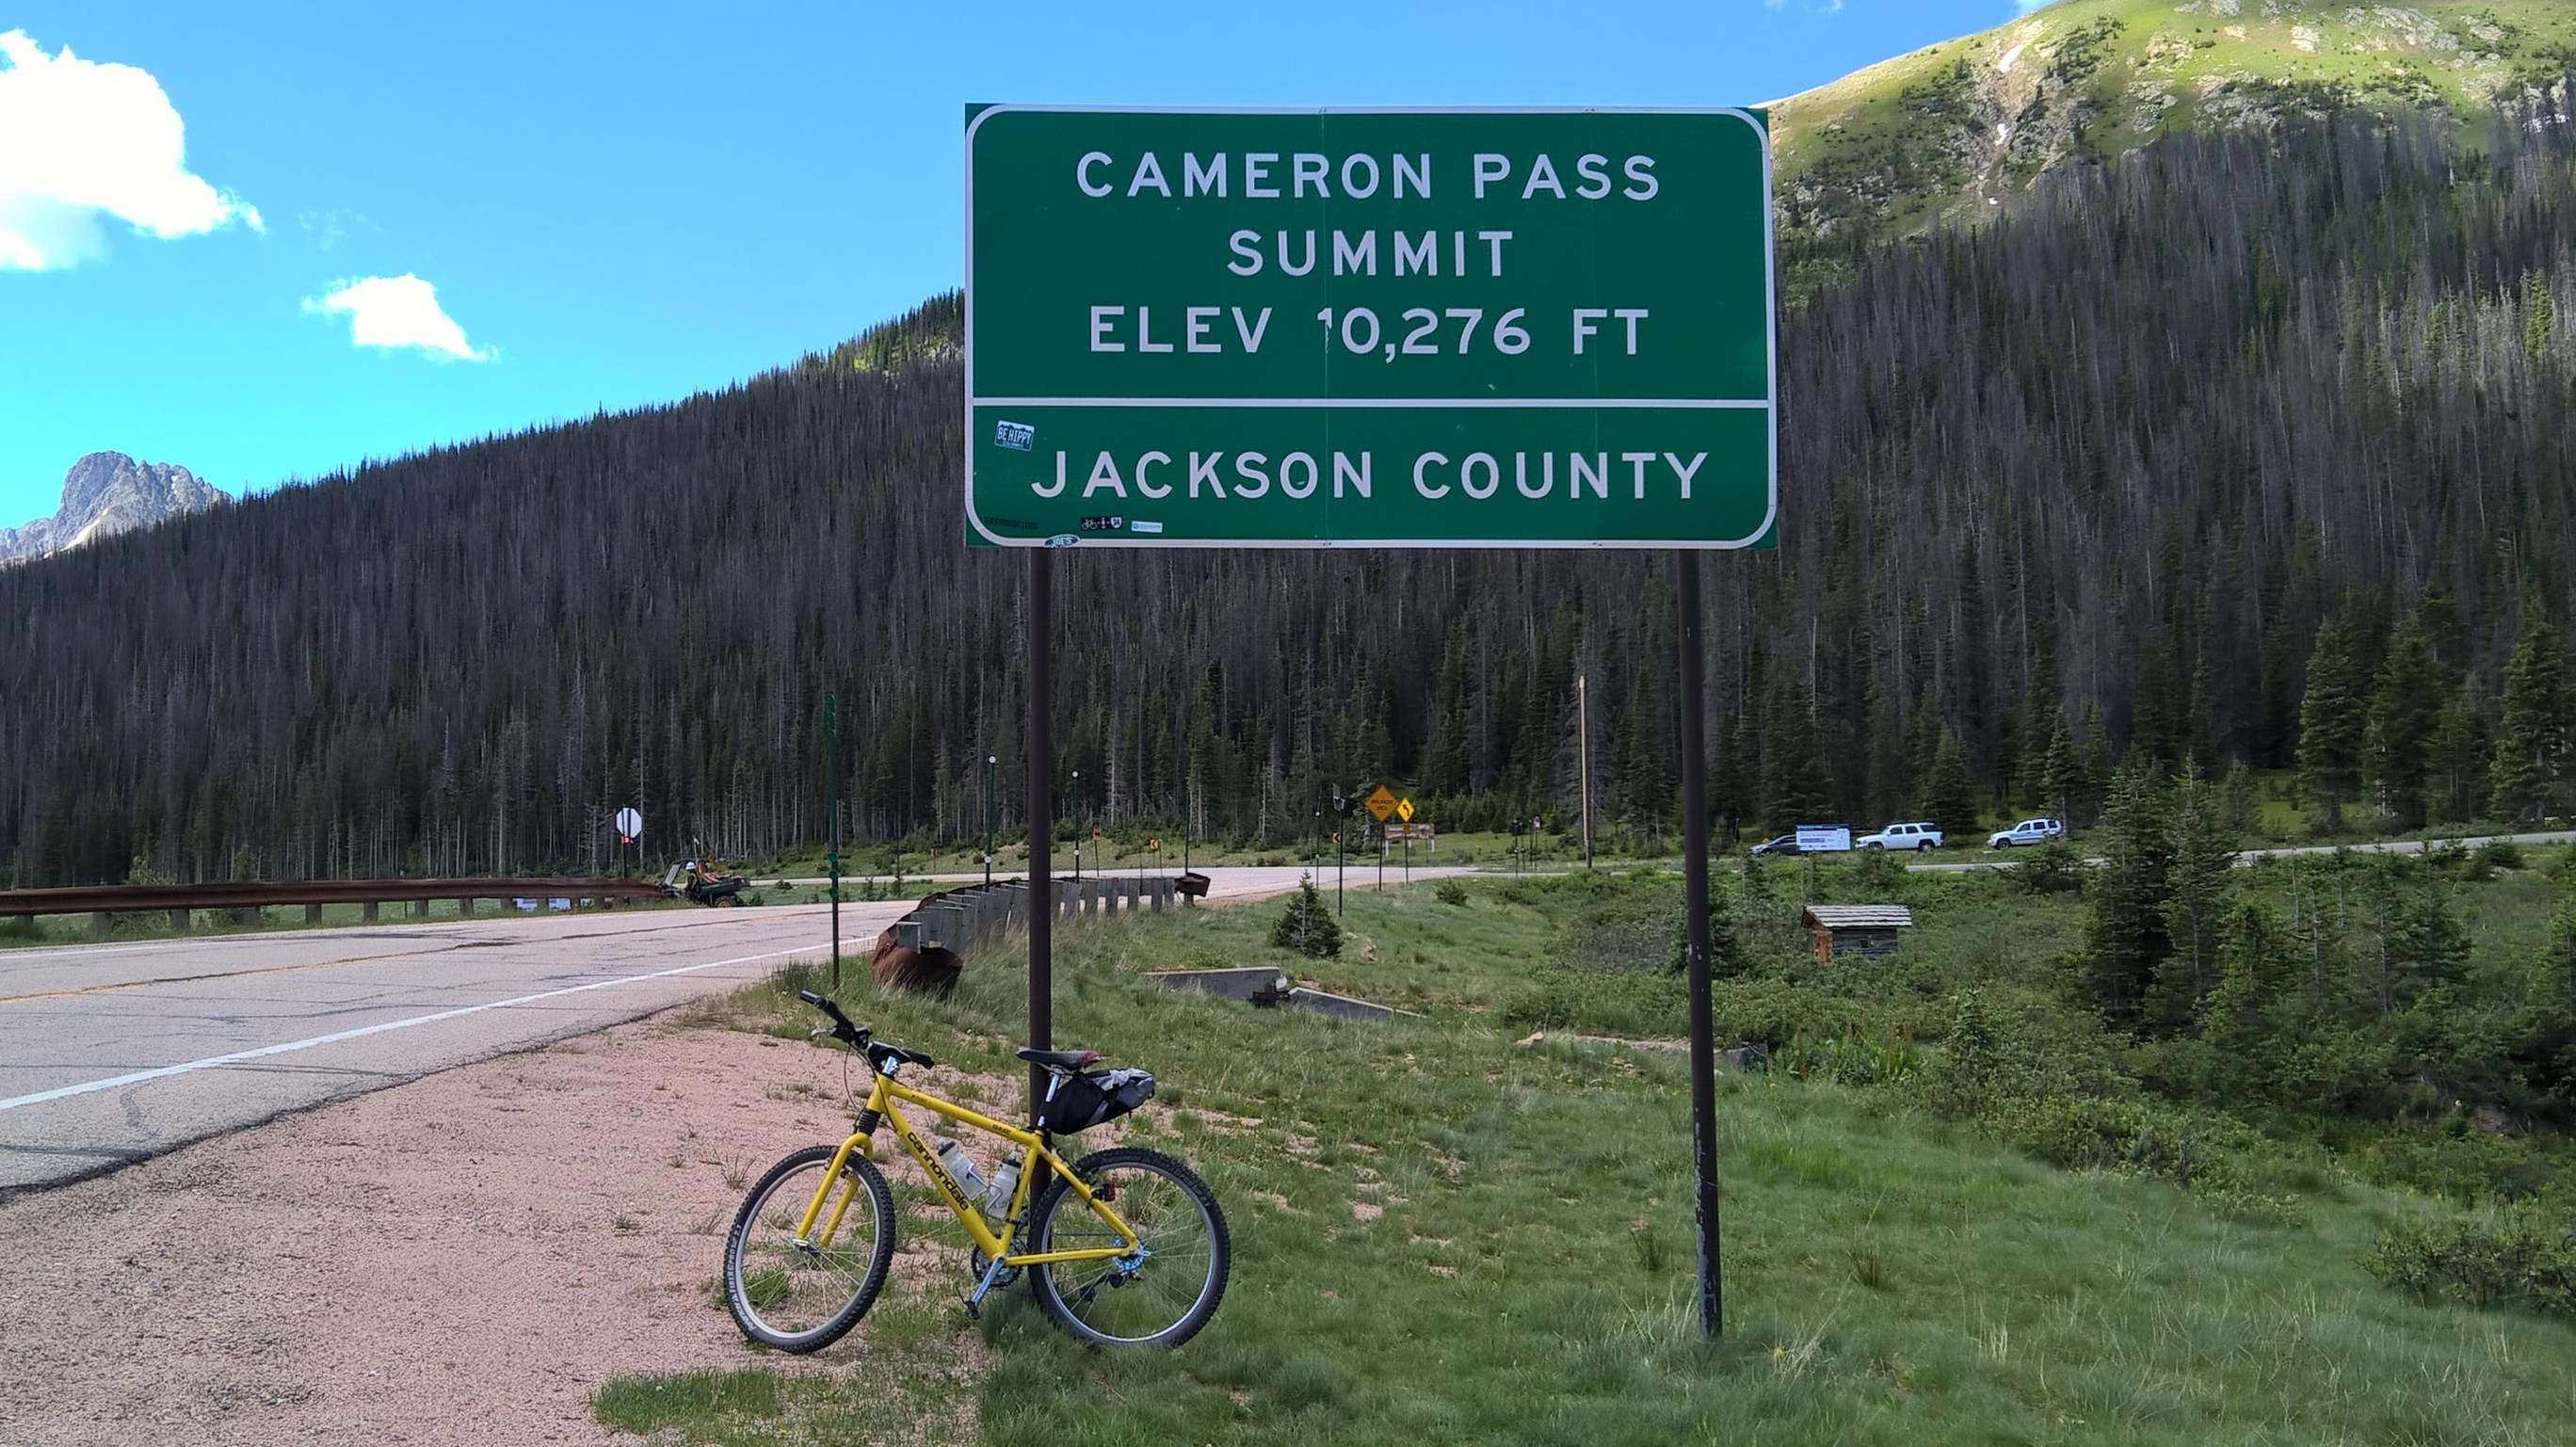 My yellow 1996 Cannondale F700 mountain bike at the summit of Cameron Pass.